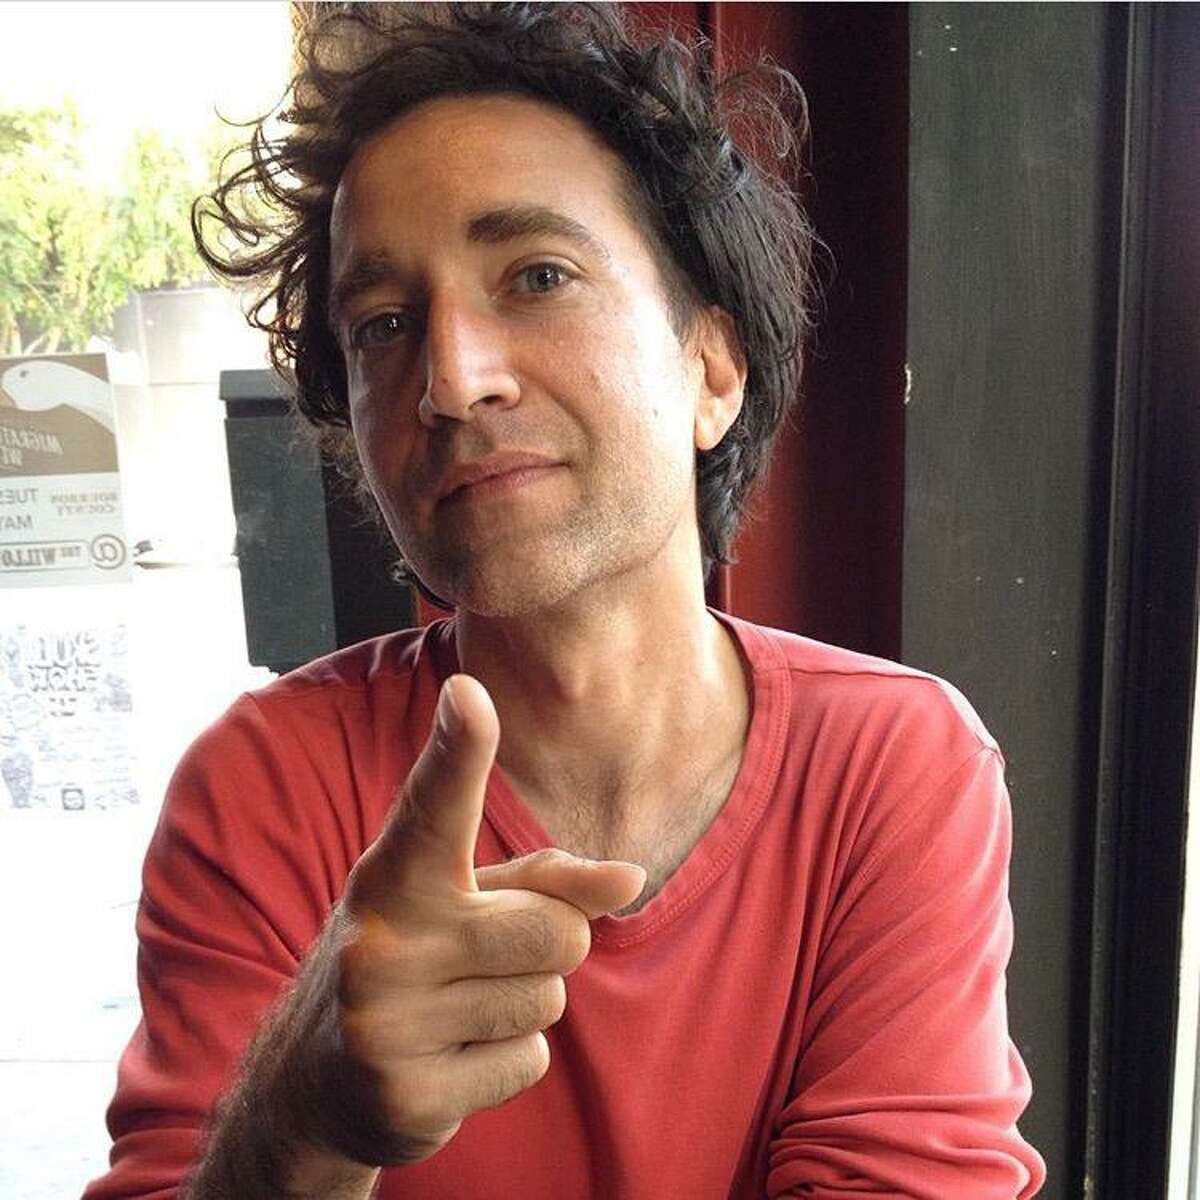 Dave Deporis, 40, was a talented musician who was tragically killed in Oakland’s Temescal neighborhood on Wednesday.